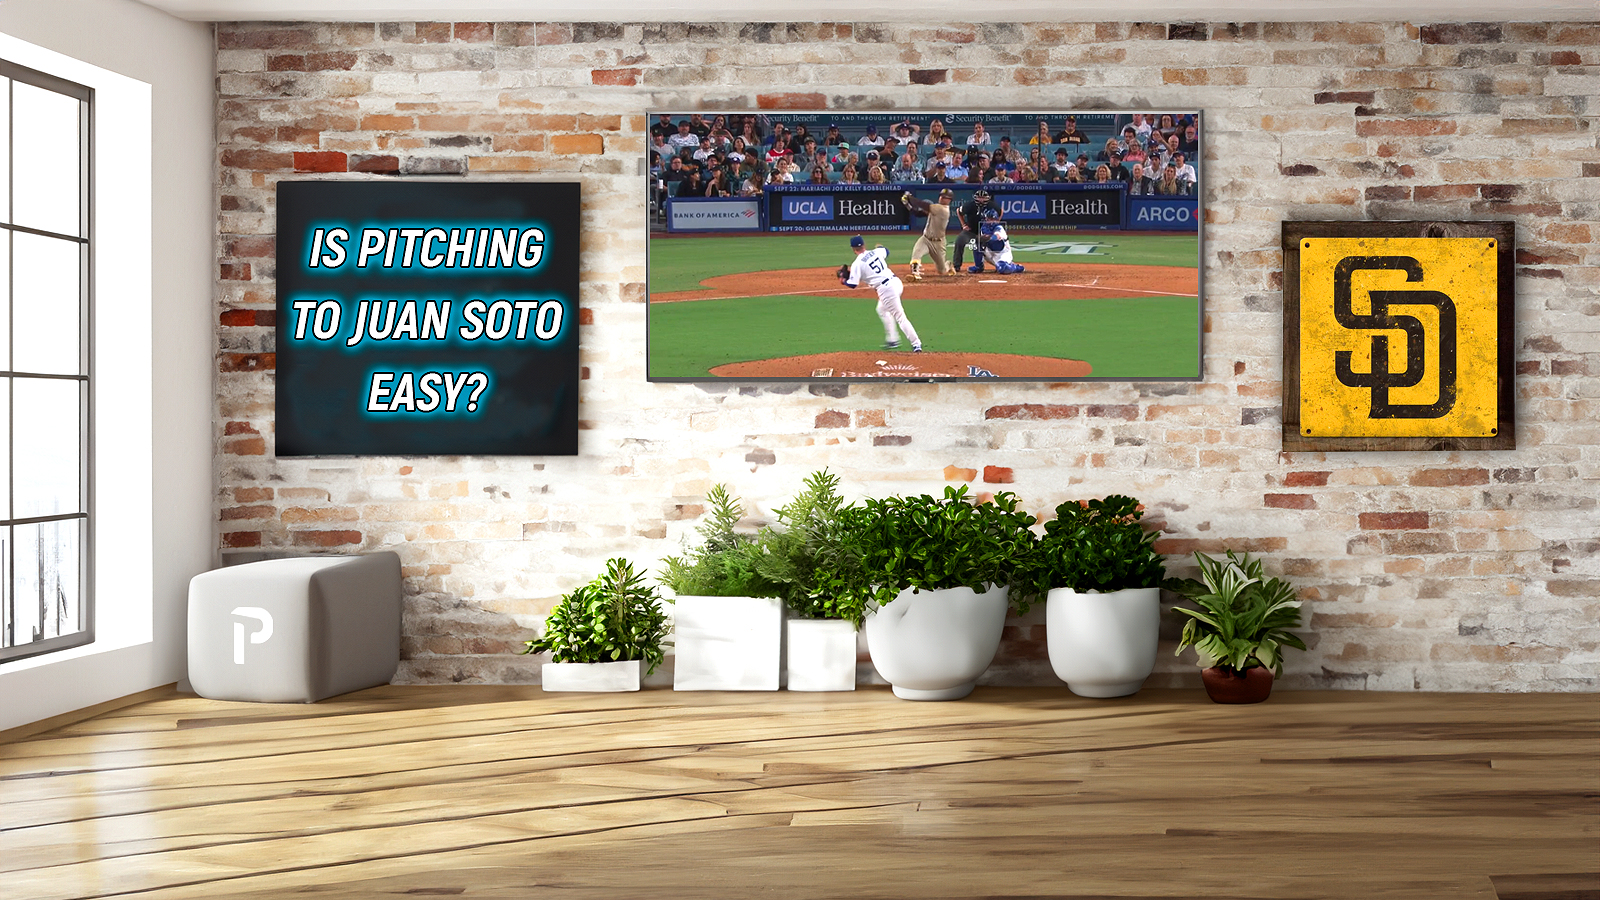 Juan Soto projected as top hitter in 2023